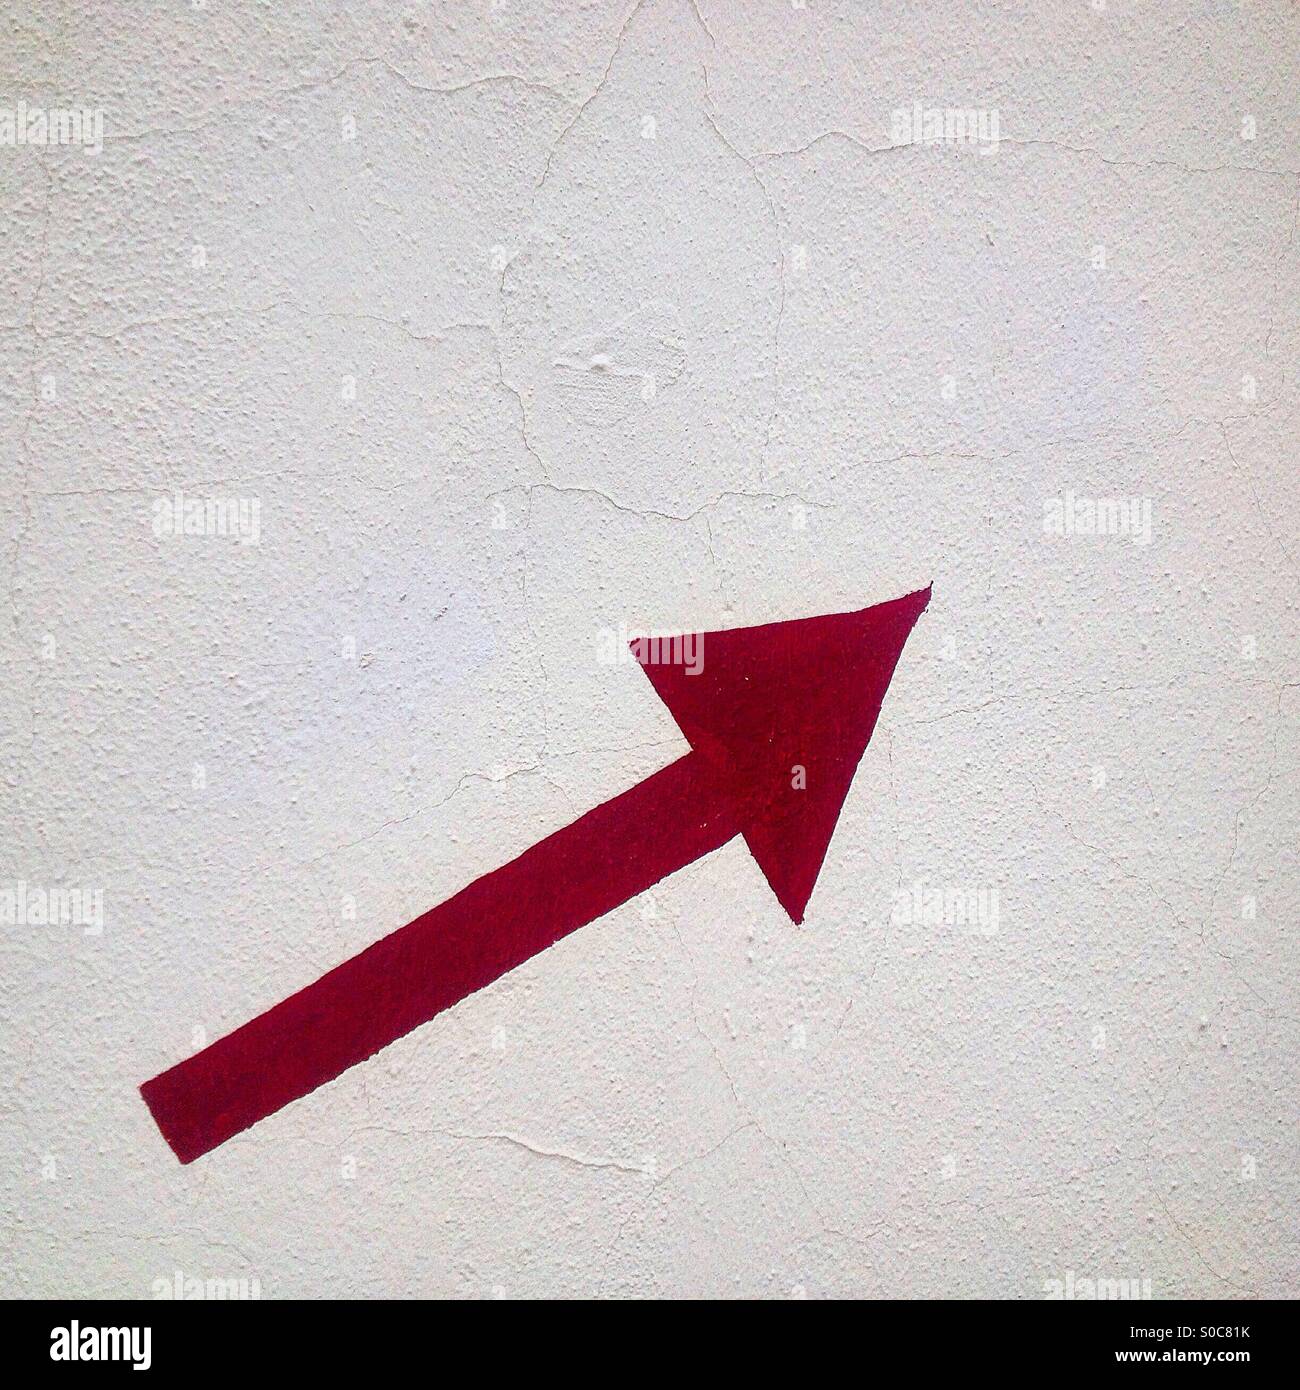 A painted red arrow pointing up right decorates a white wall in Medina Sidonia, Cadiz, Andalusia,Spain Stock Photo